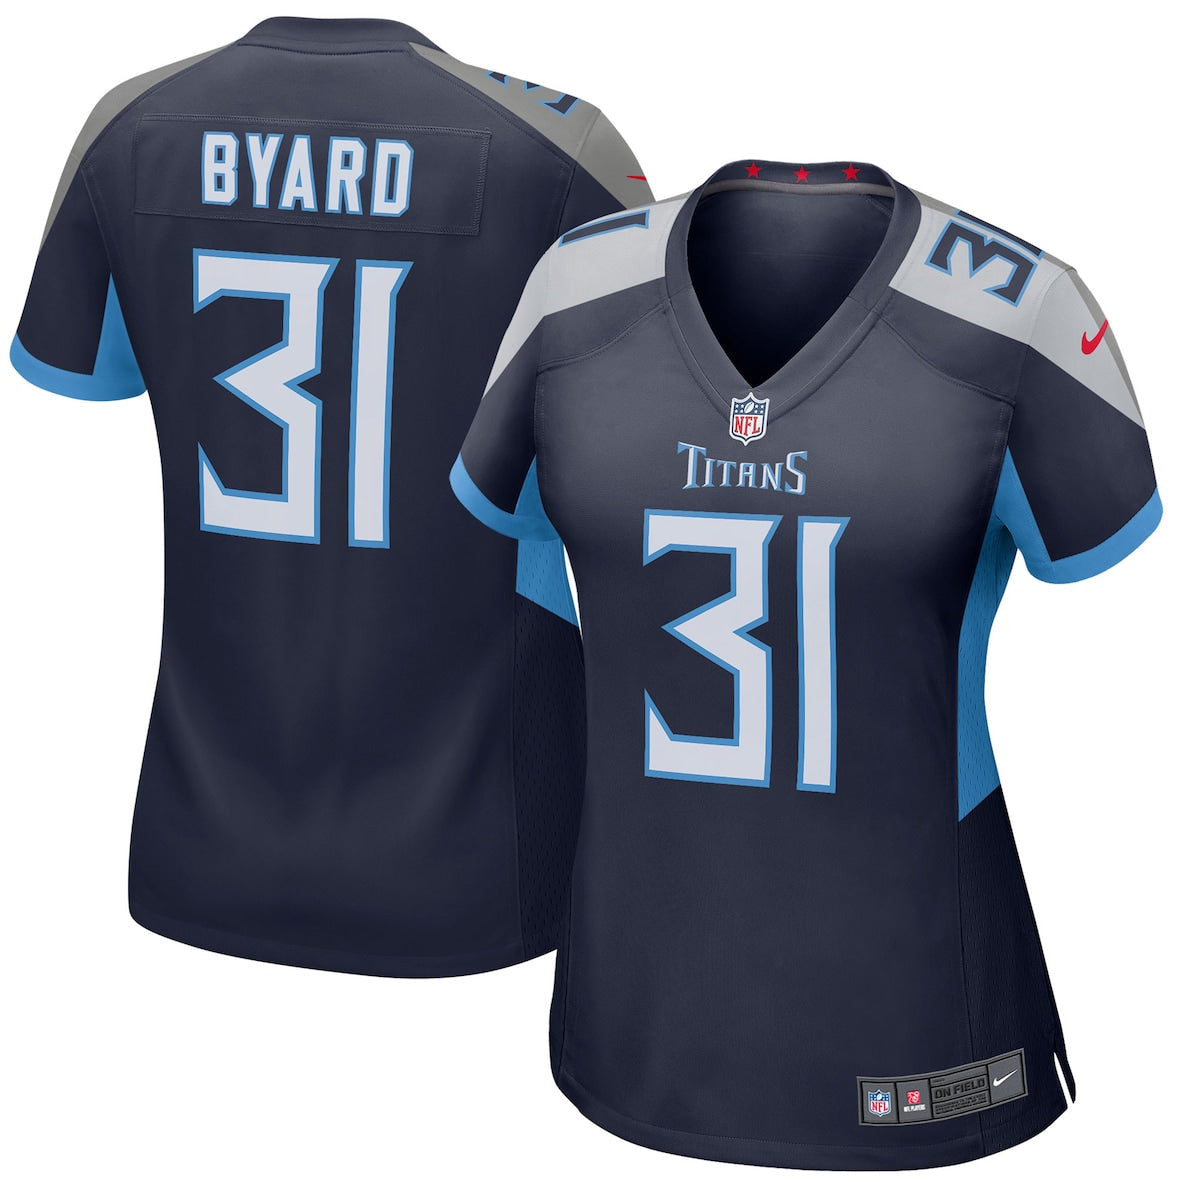 Titans Throwback Oilers Jersey, Get your official jersey now